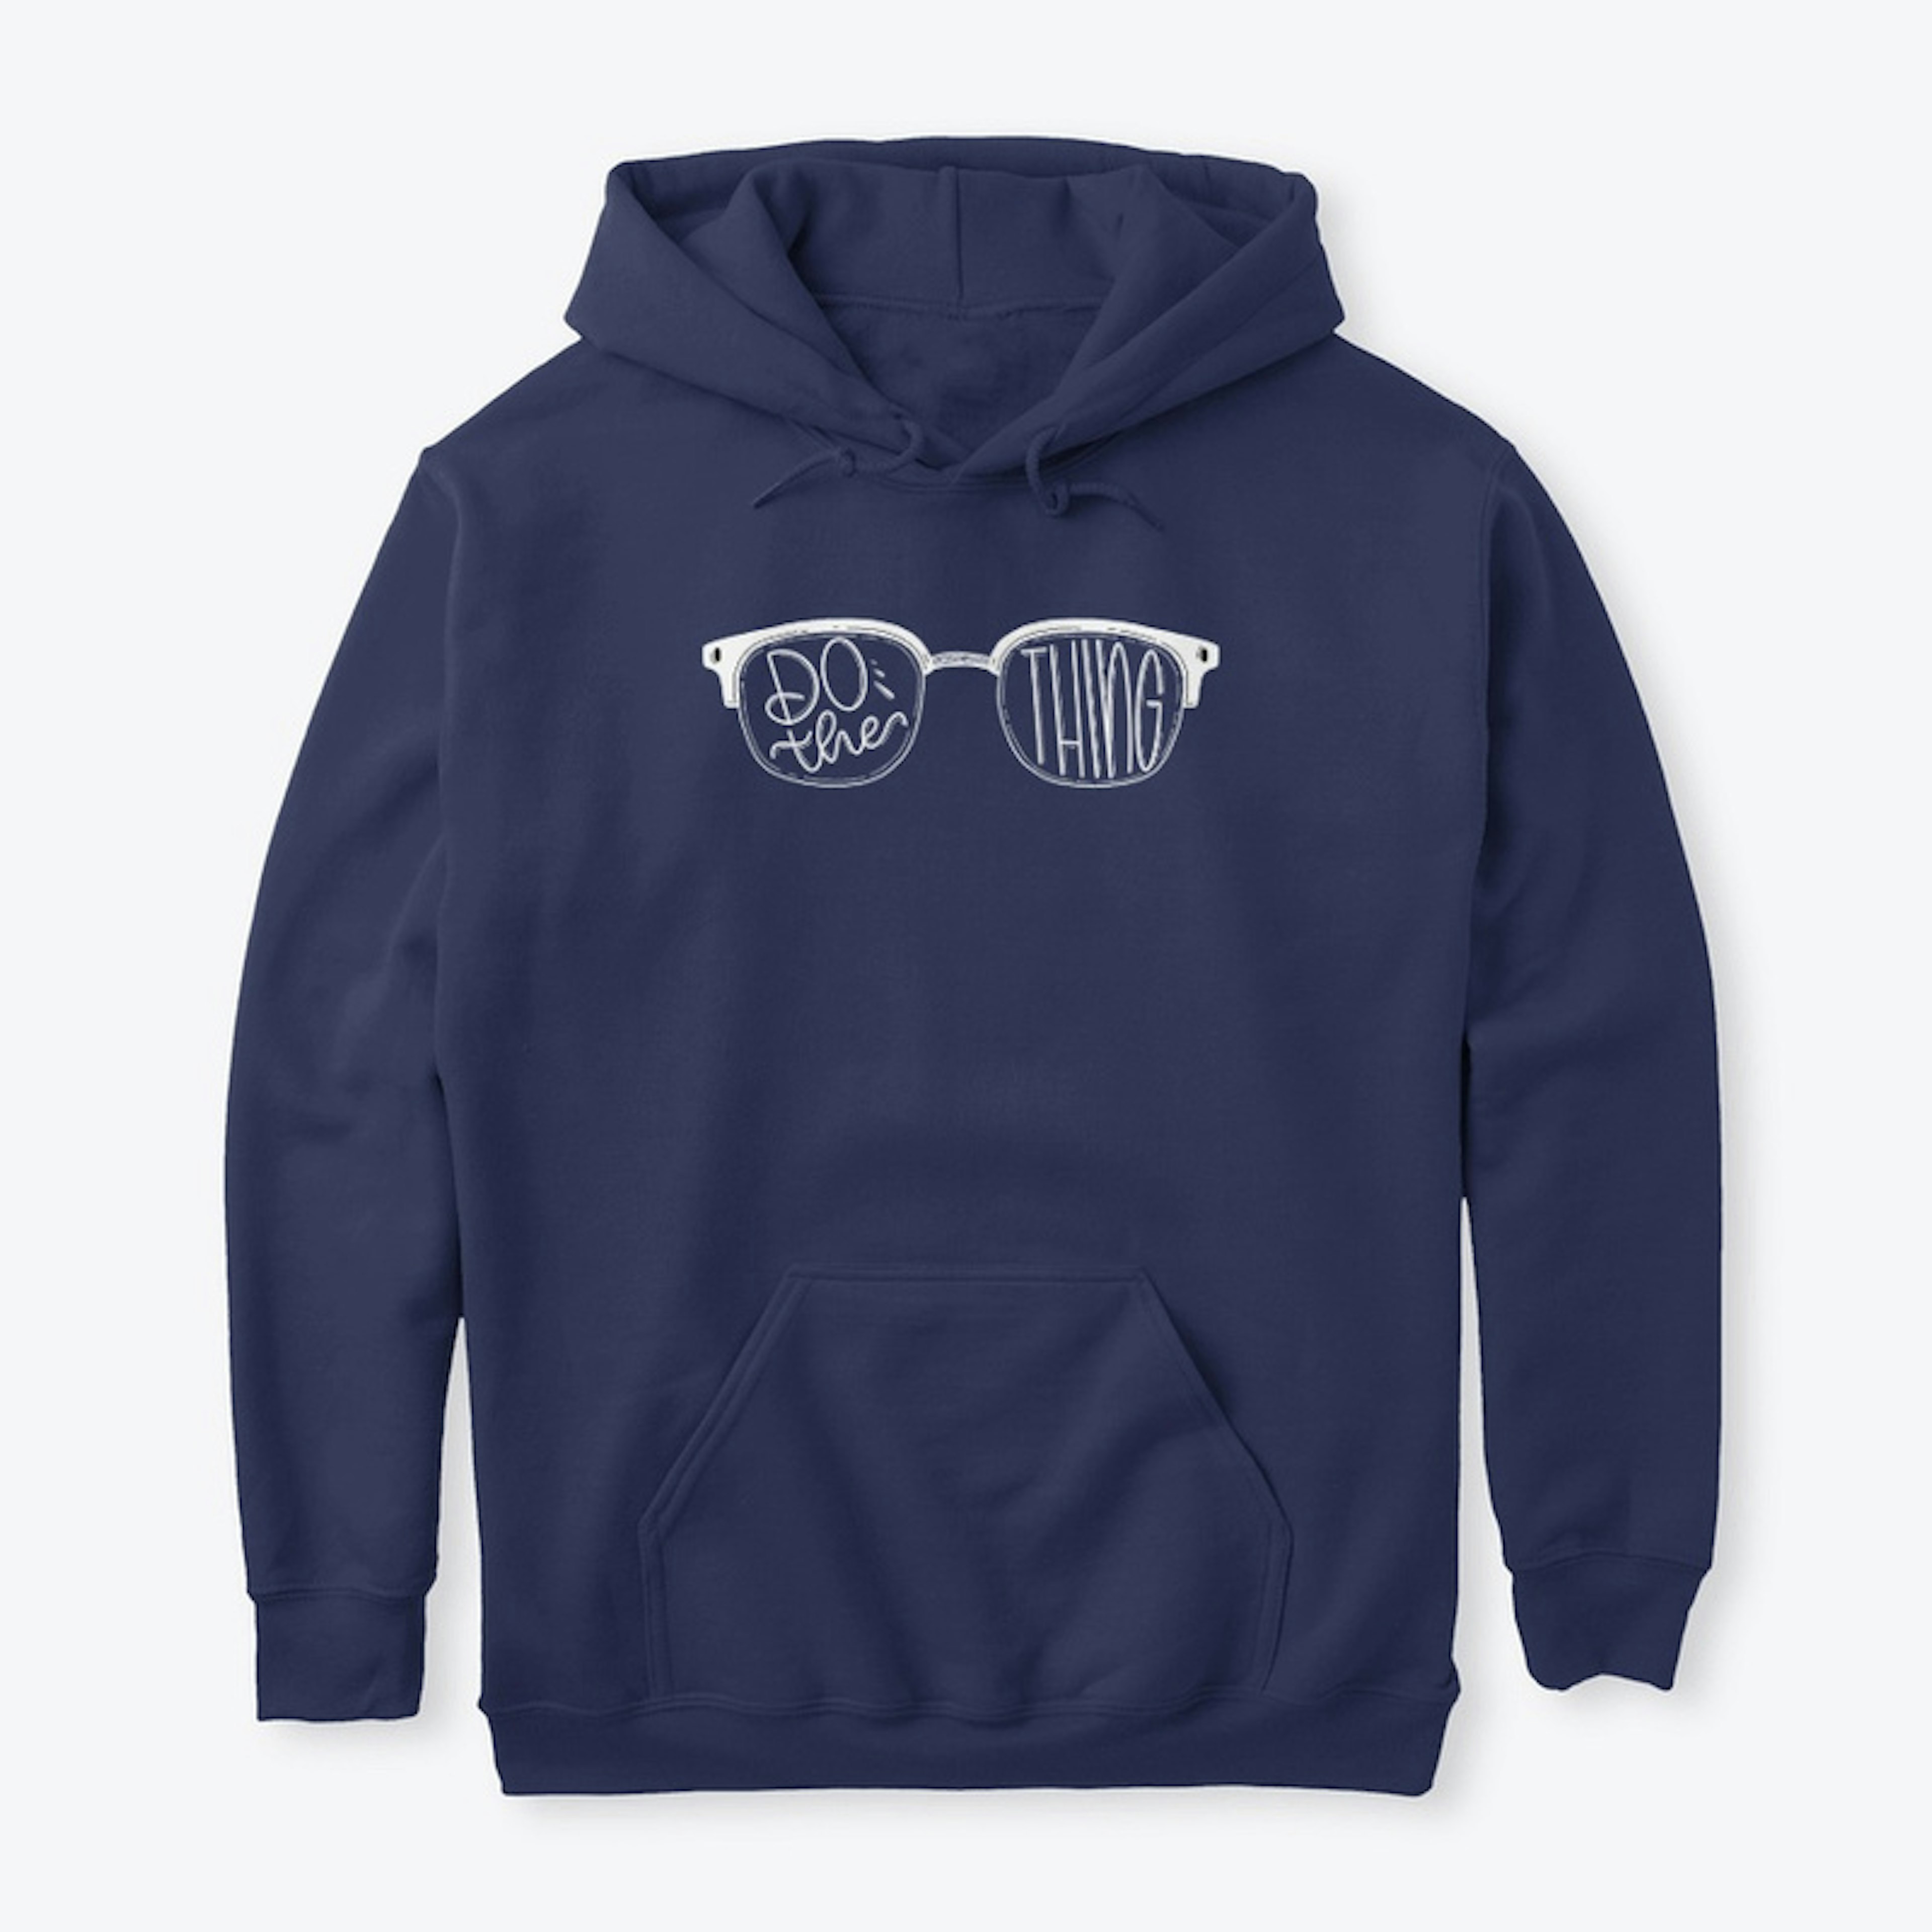 Buy a Hoodie Do the Thing